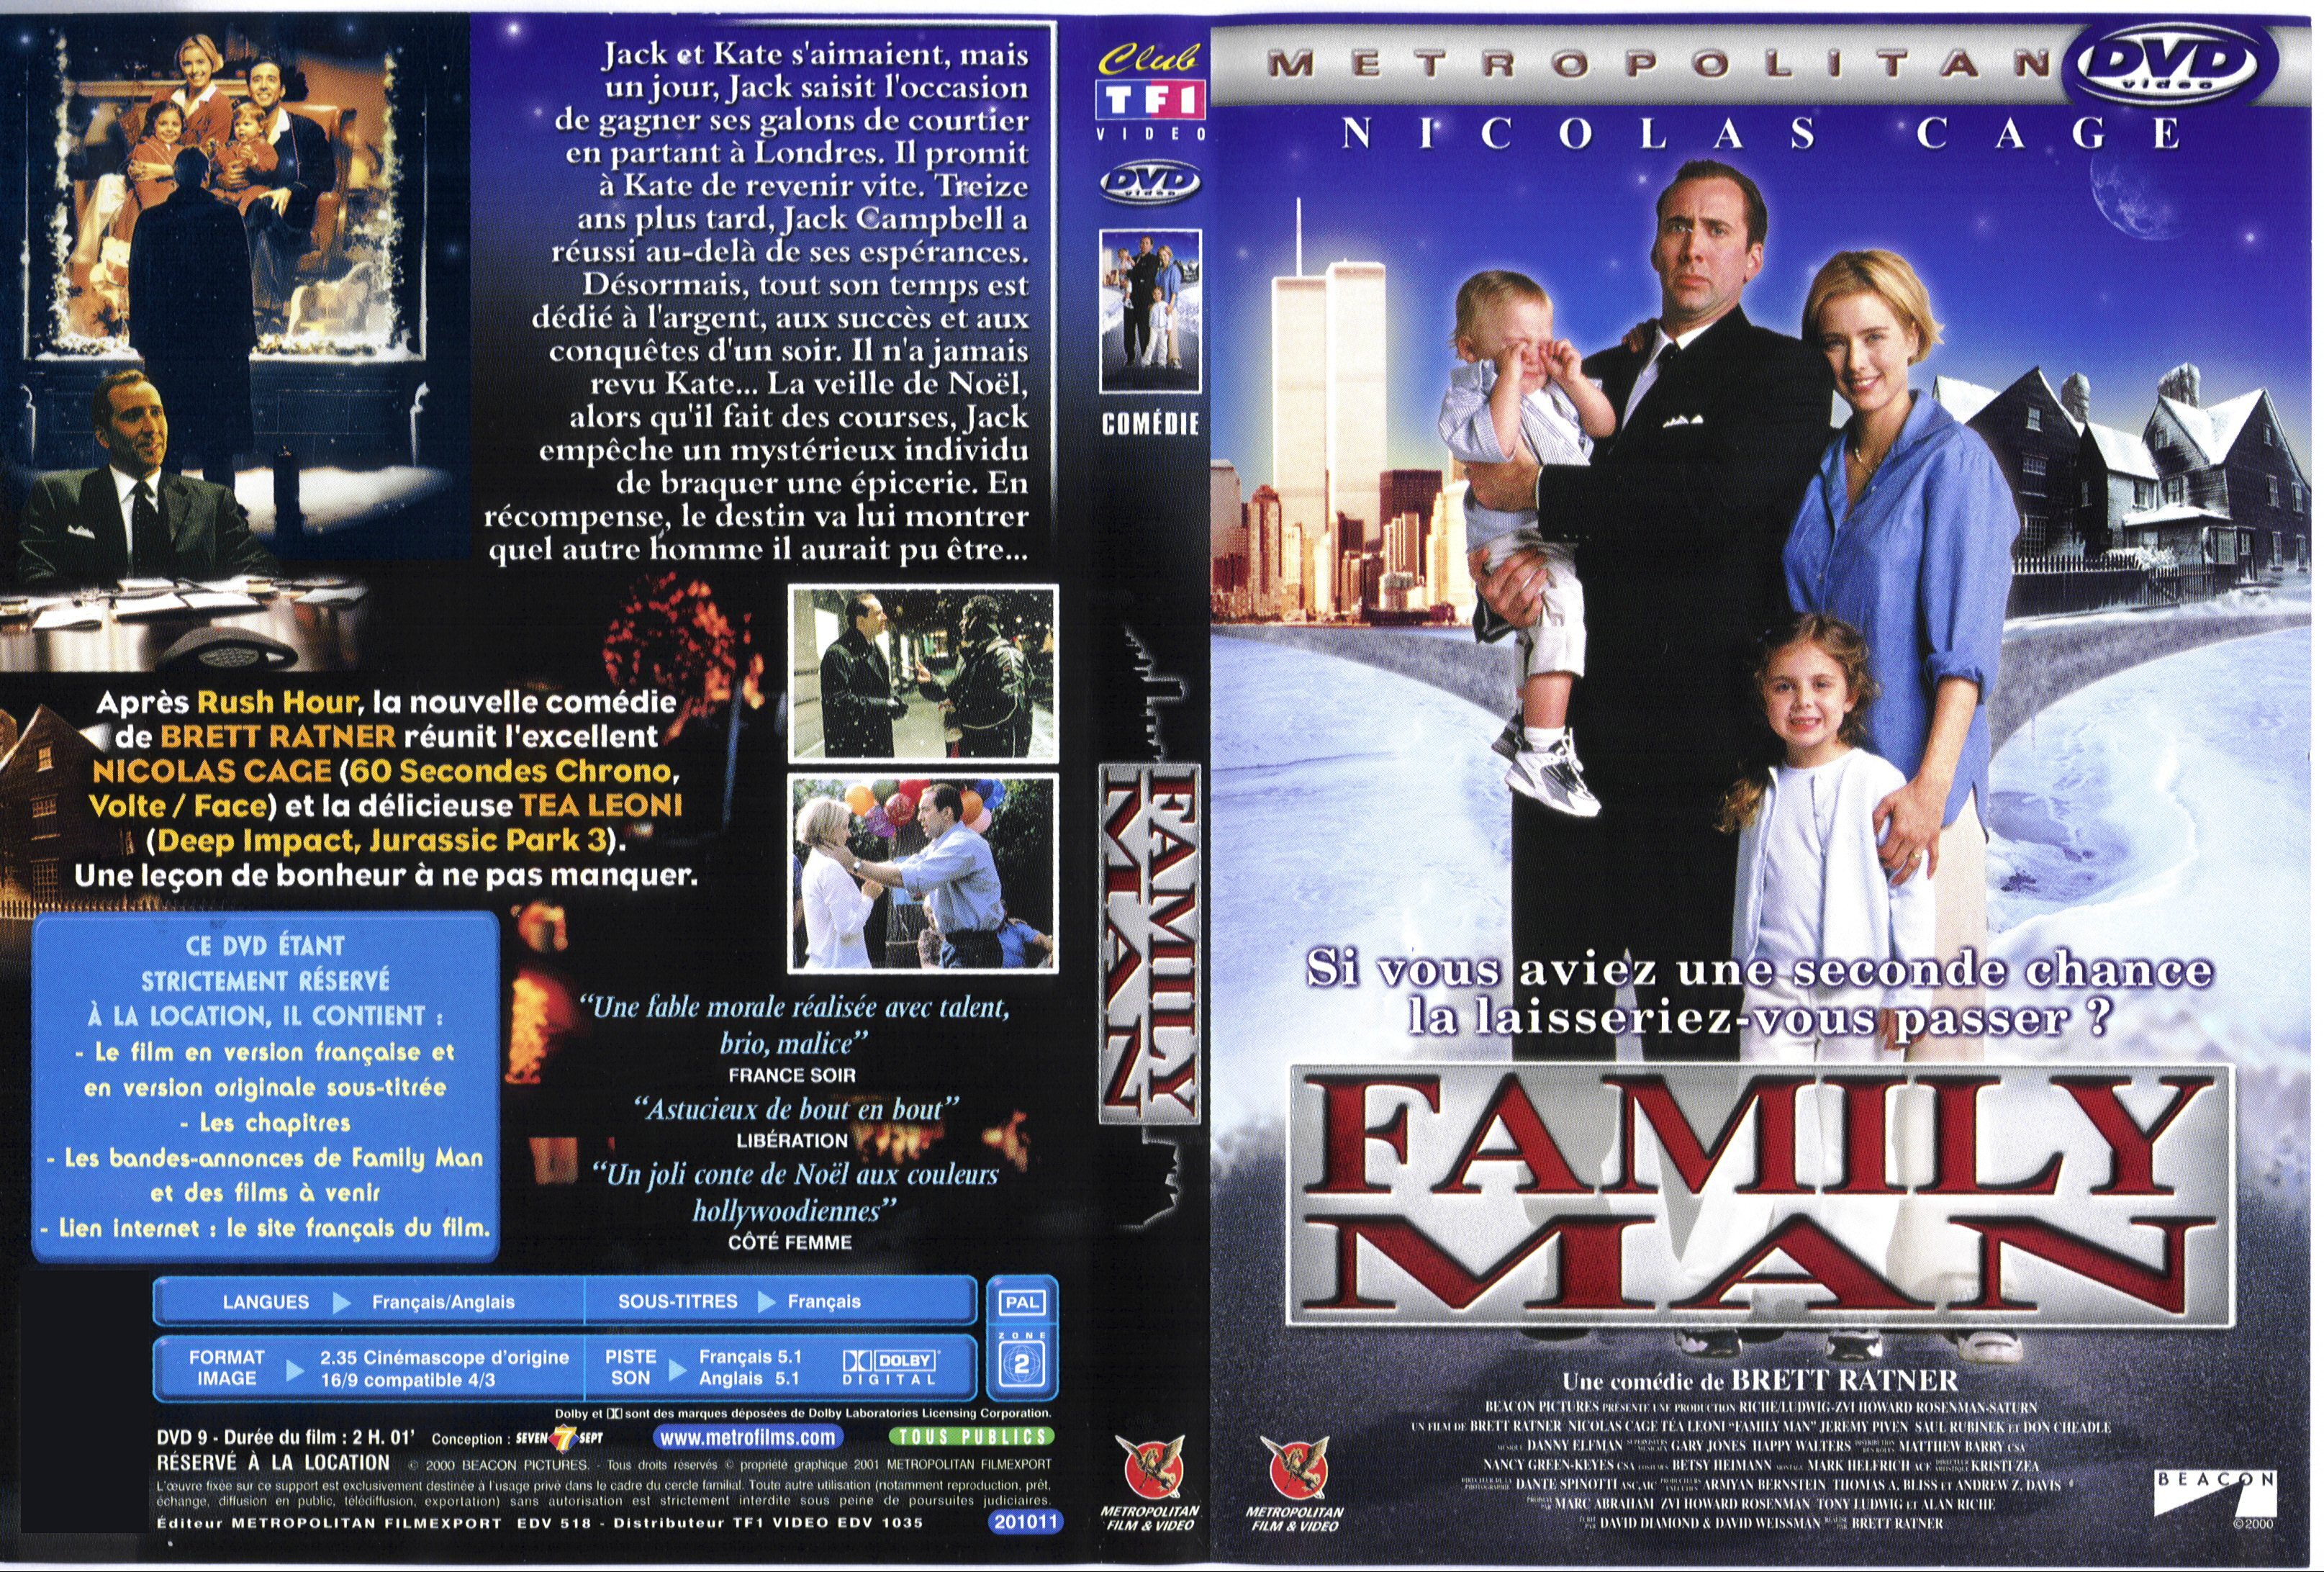 Jaquette DVD Family man